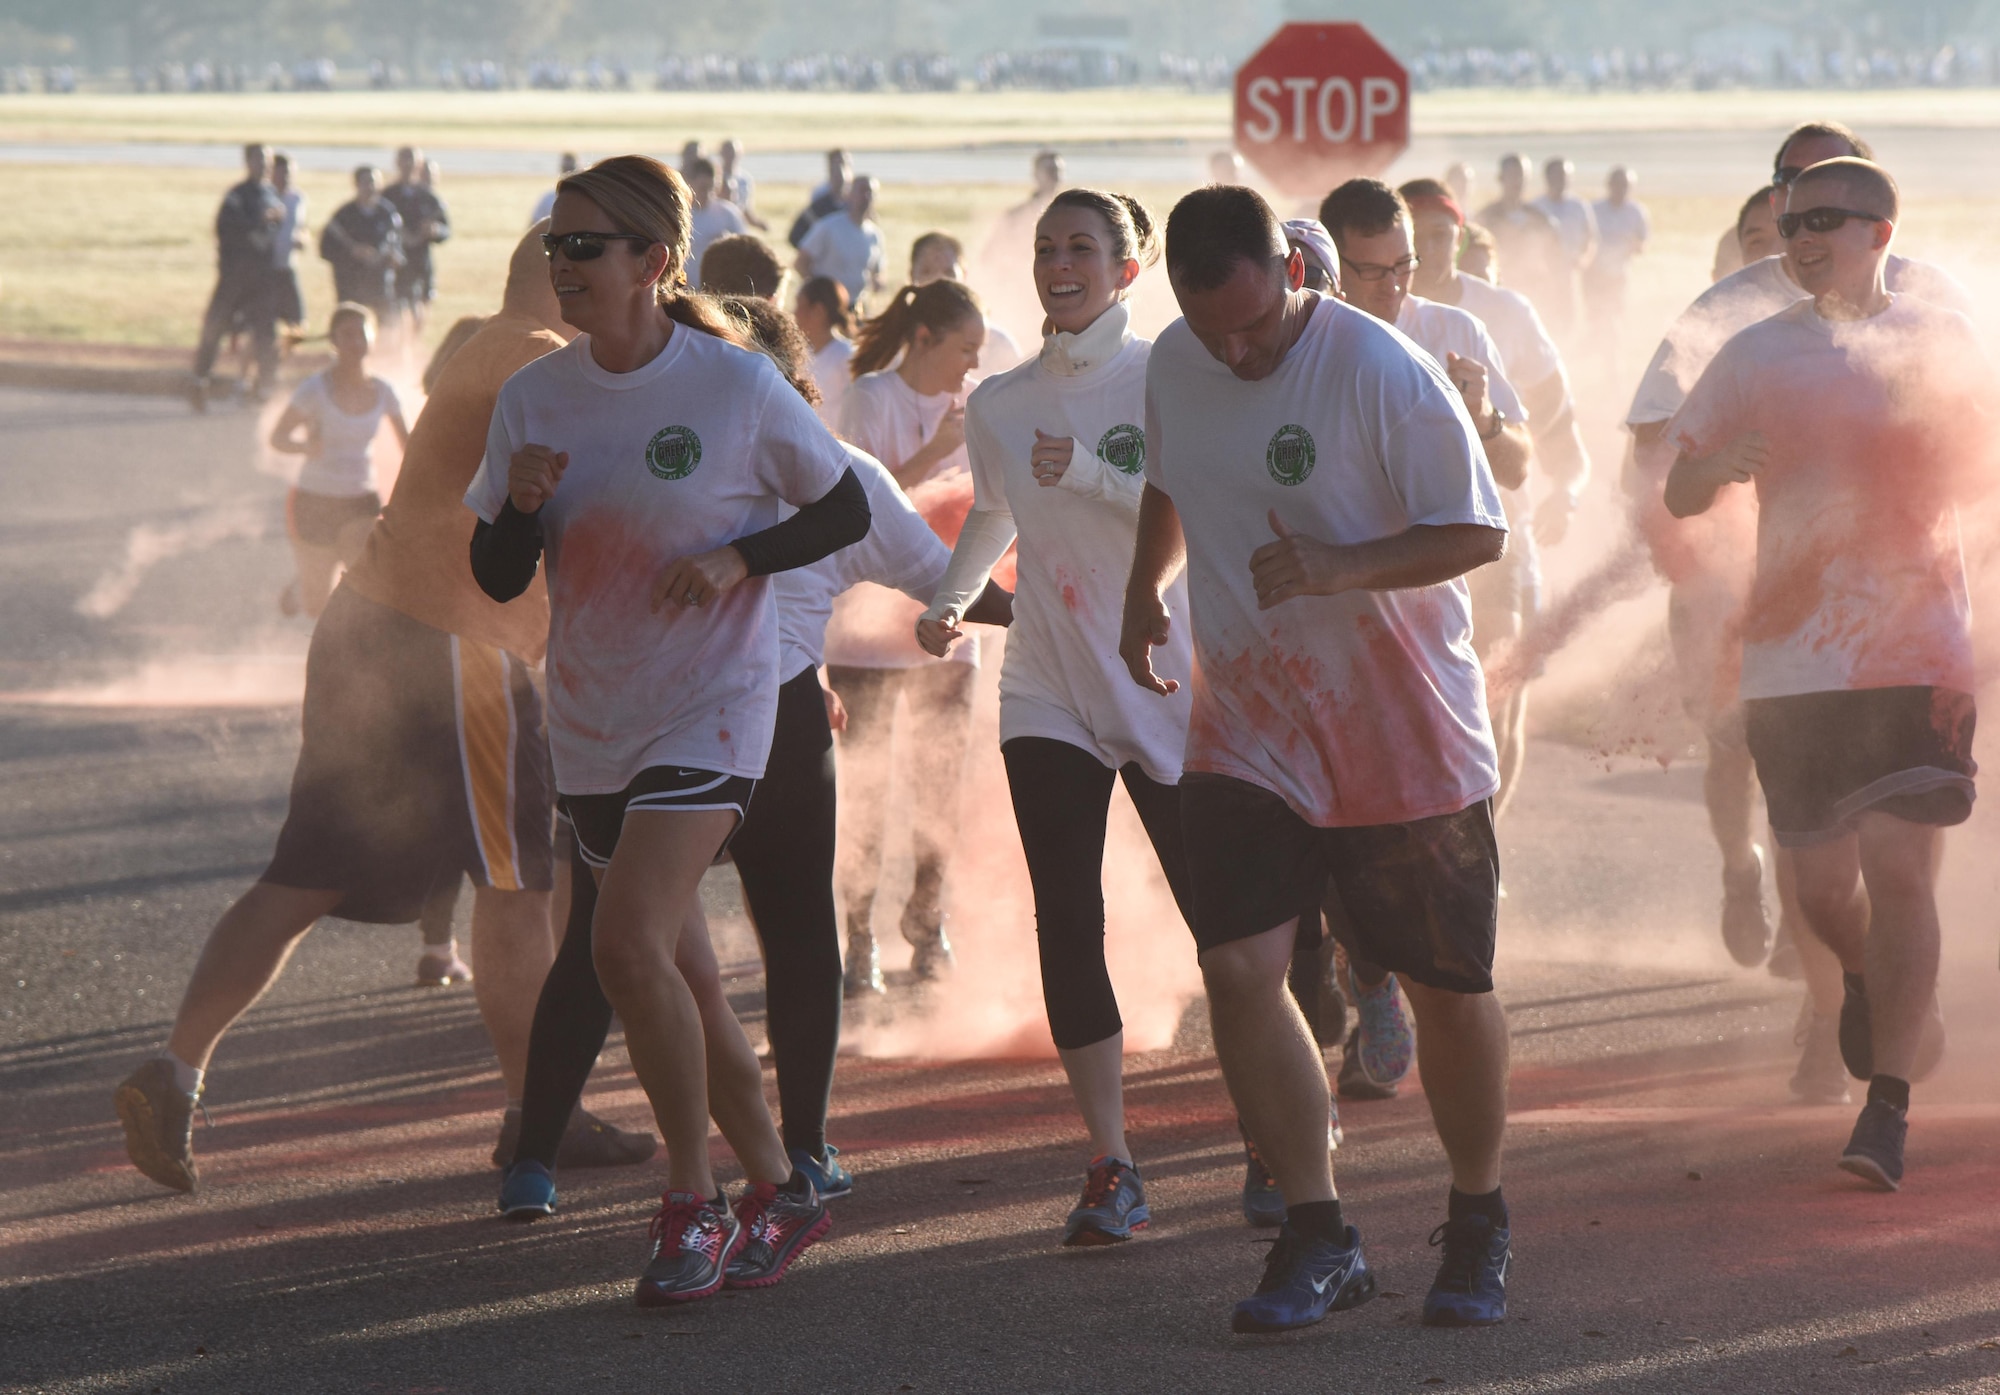 Col. Michele Edmondson, 81st Training Wing commander, and Chief Master Sgt. Anthony Fisher, 81st Training Group superintendent, participate in a Wing color run at the Marina Park Nov. 17, 2016, on Keesler Air Force Base, Miss. The run was one of several events held throughout Dragon Week, which focuses on resiliency and teambuilding initiatives across the base. (U.S. Air Force photo by Kemberly Groue/Released)